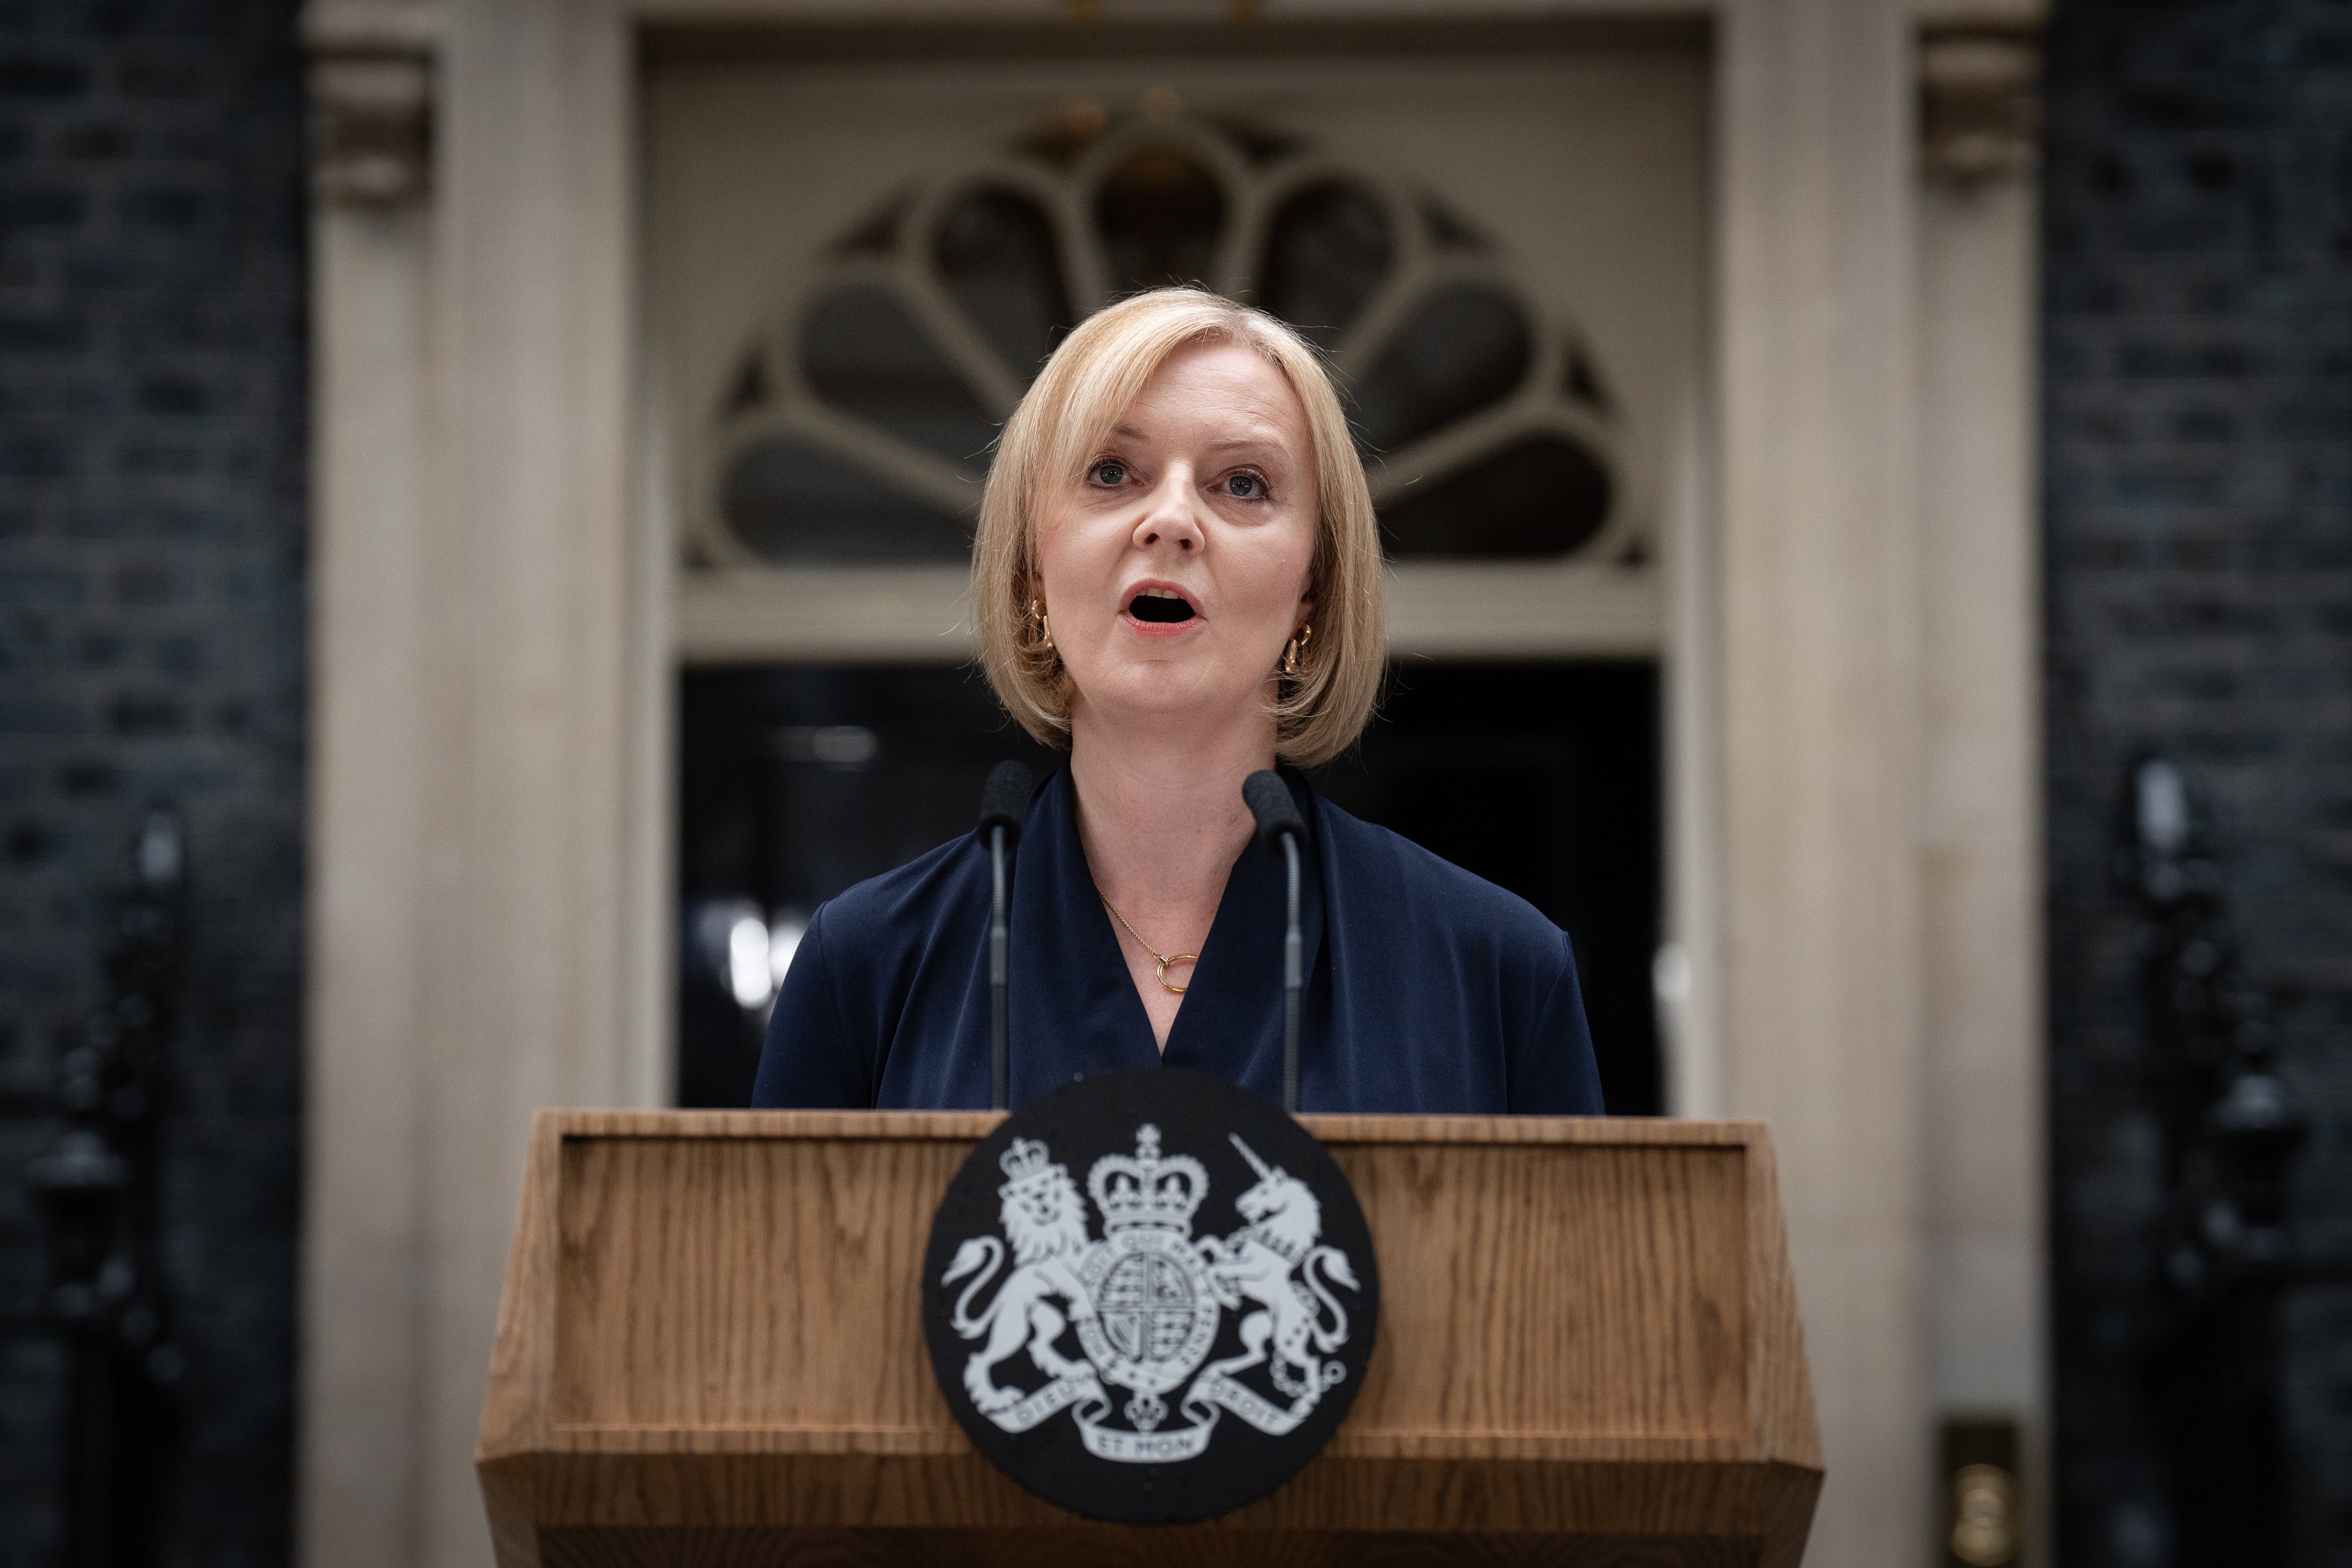 Liz Truss addresses the nation for the first time from the steps of No 10 (Stefan Rousseau/PA)